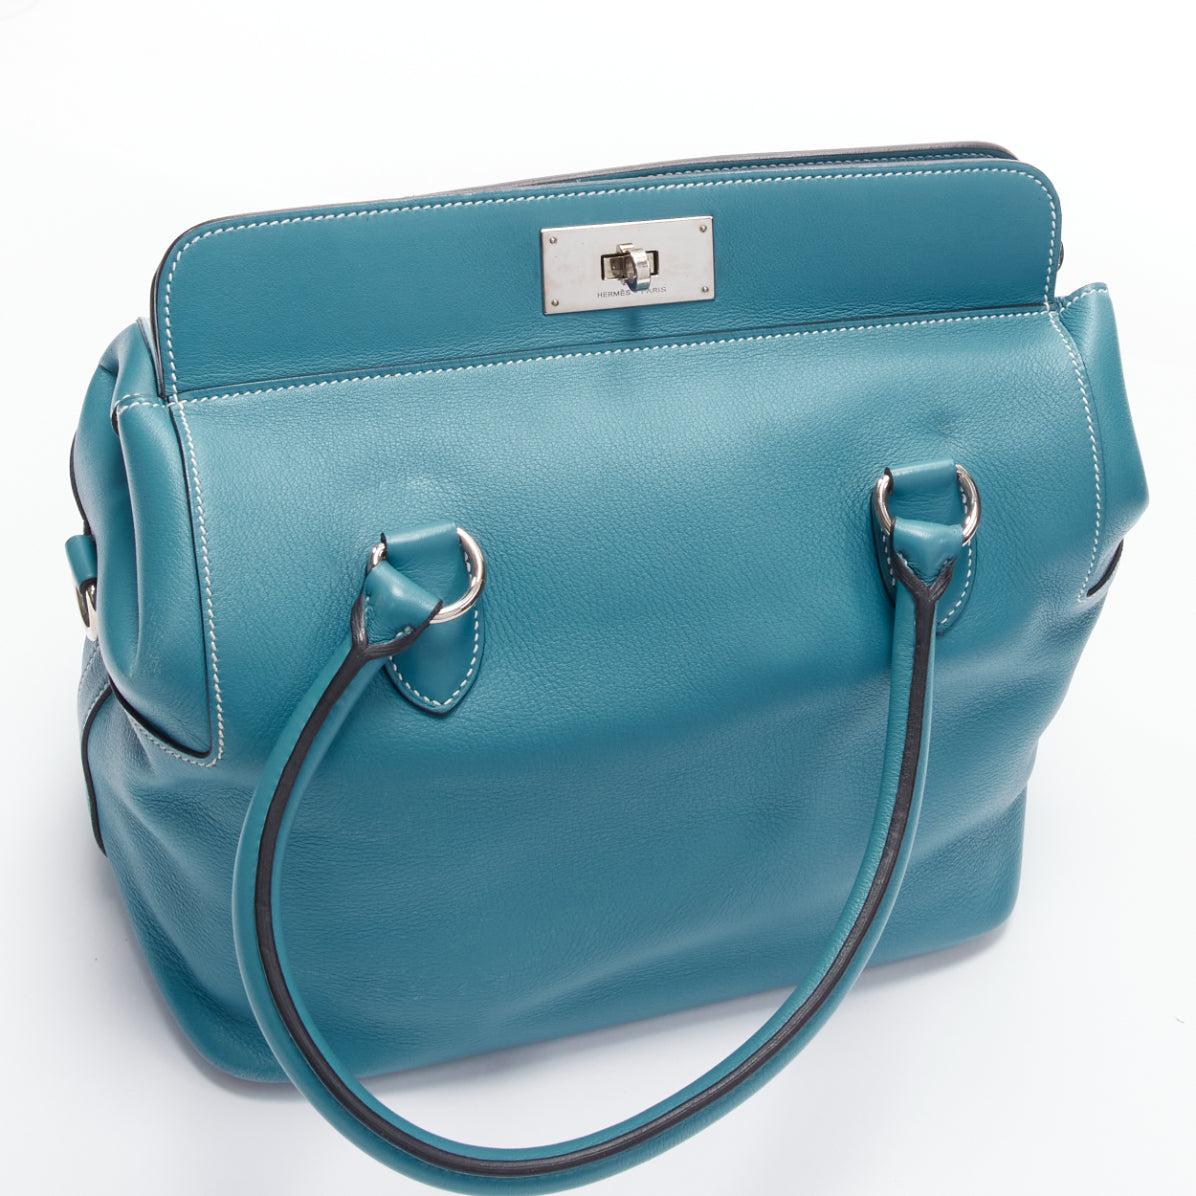 HERMES Toolbox 26 teal blue grained leather SHW top handle satchel 2